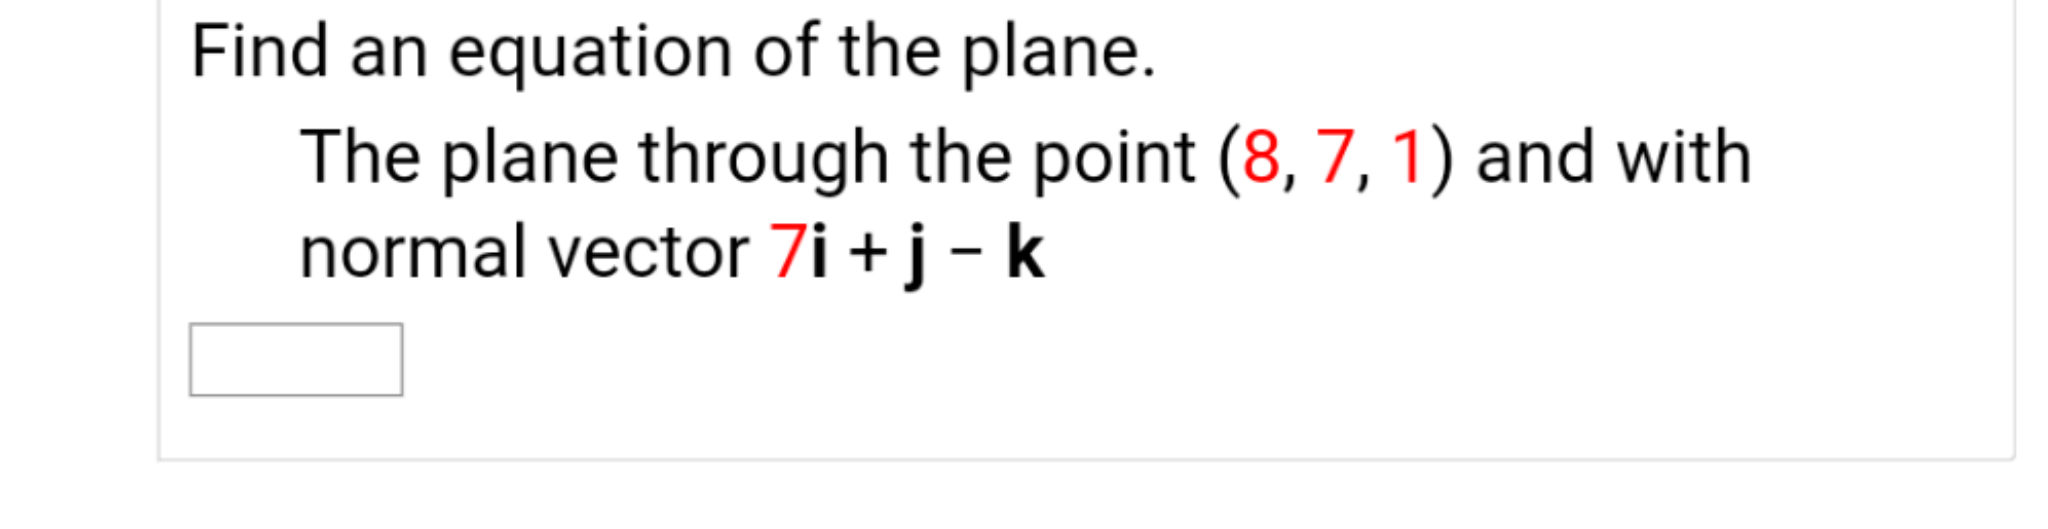 Find an equation of the plane.
The plane through the point (8, 7, 1) and with
normal vector 7i + j - k
